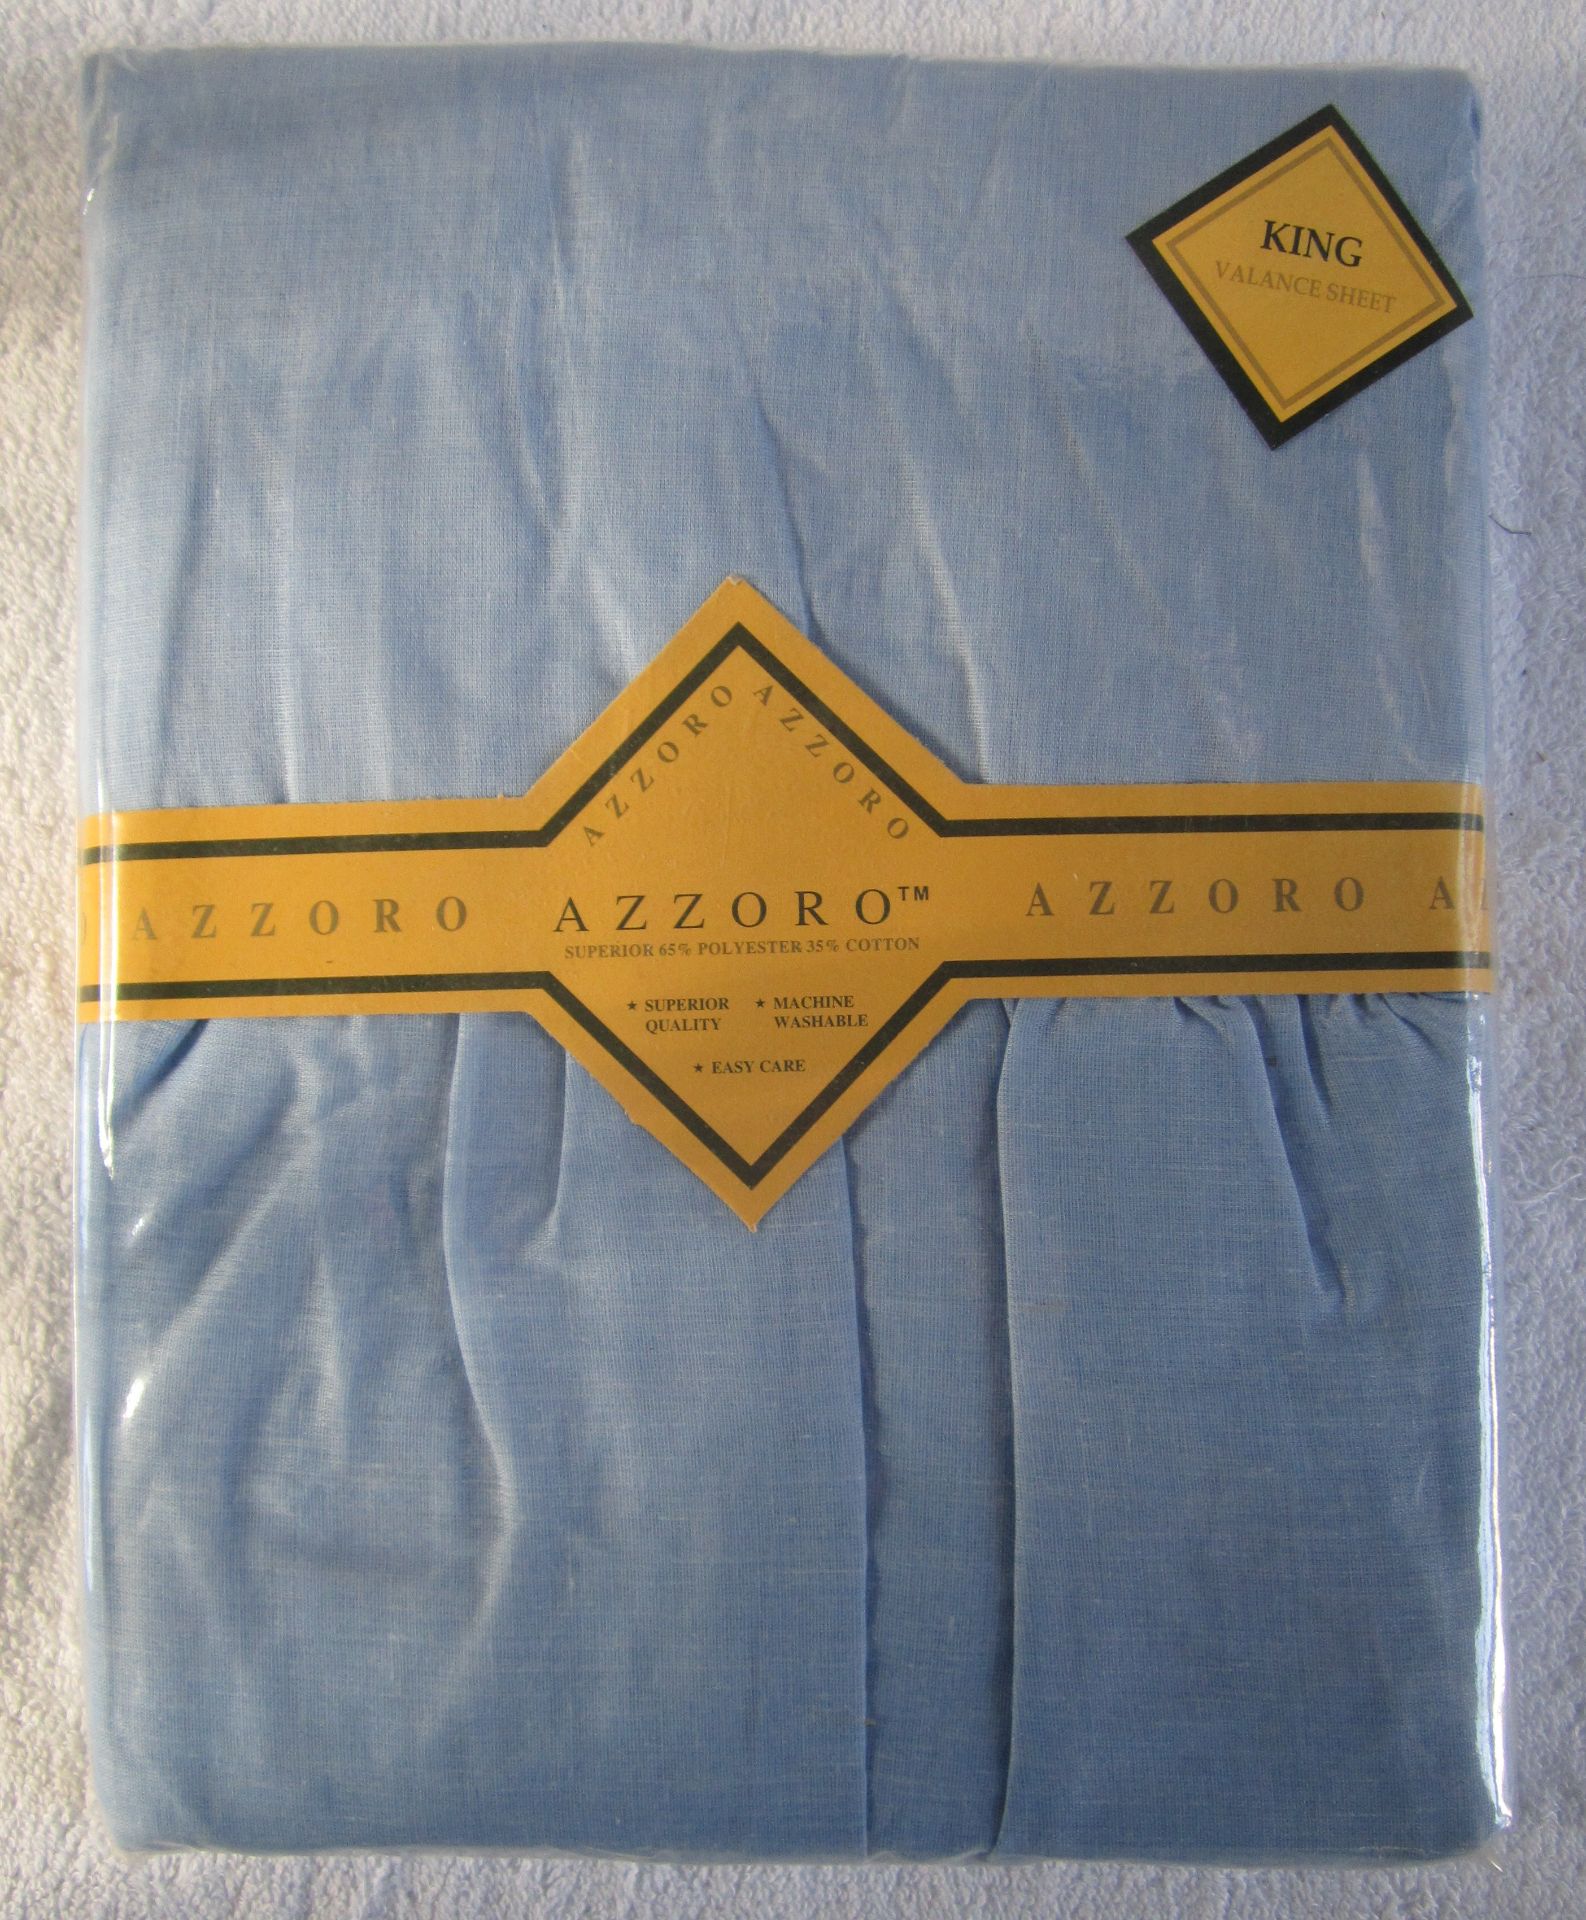 15 x Azzorro King Size Light Blue Valance Sheet (Delivery Available)